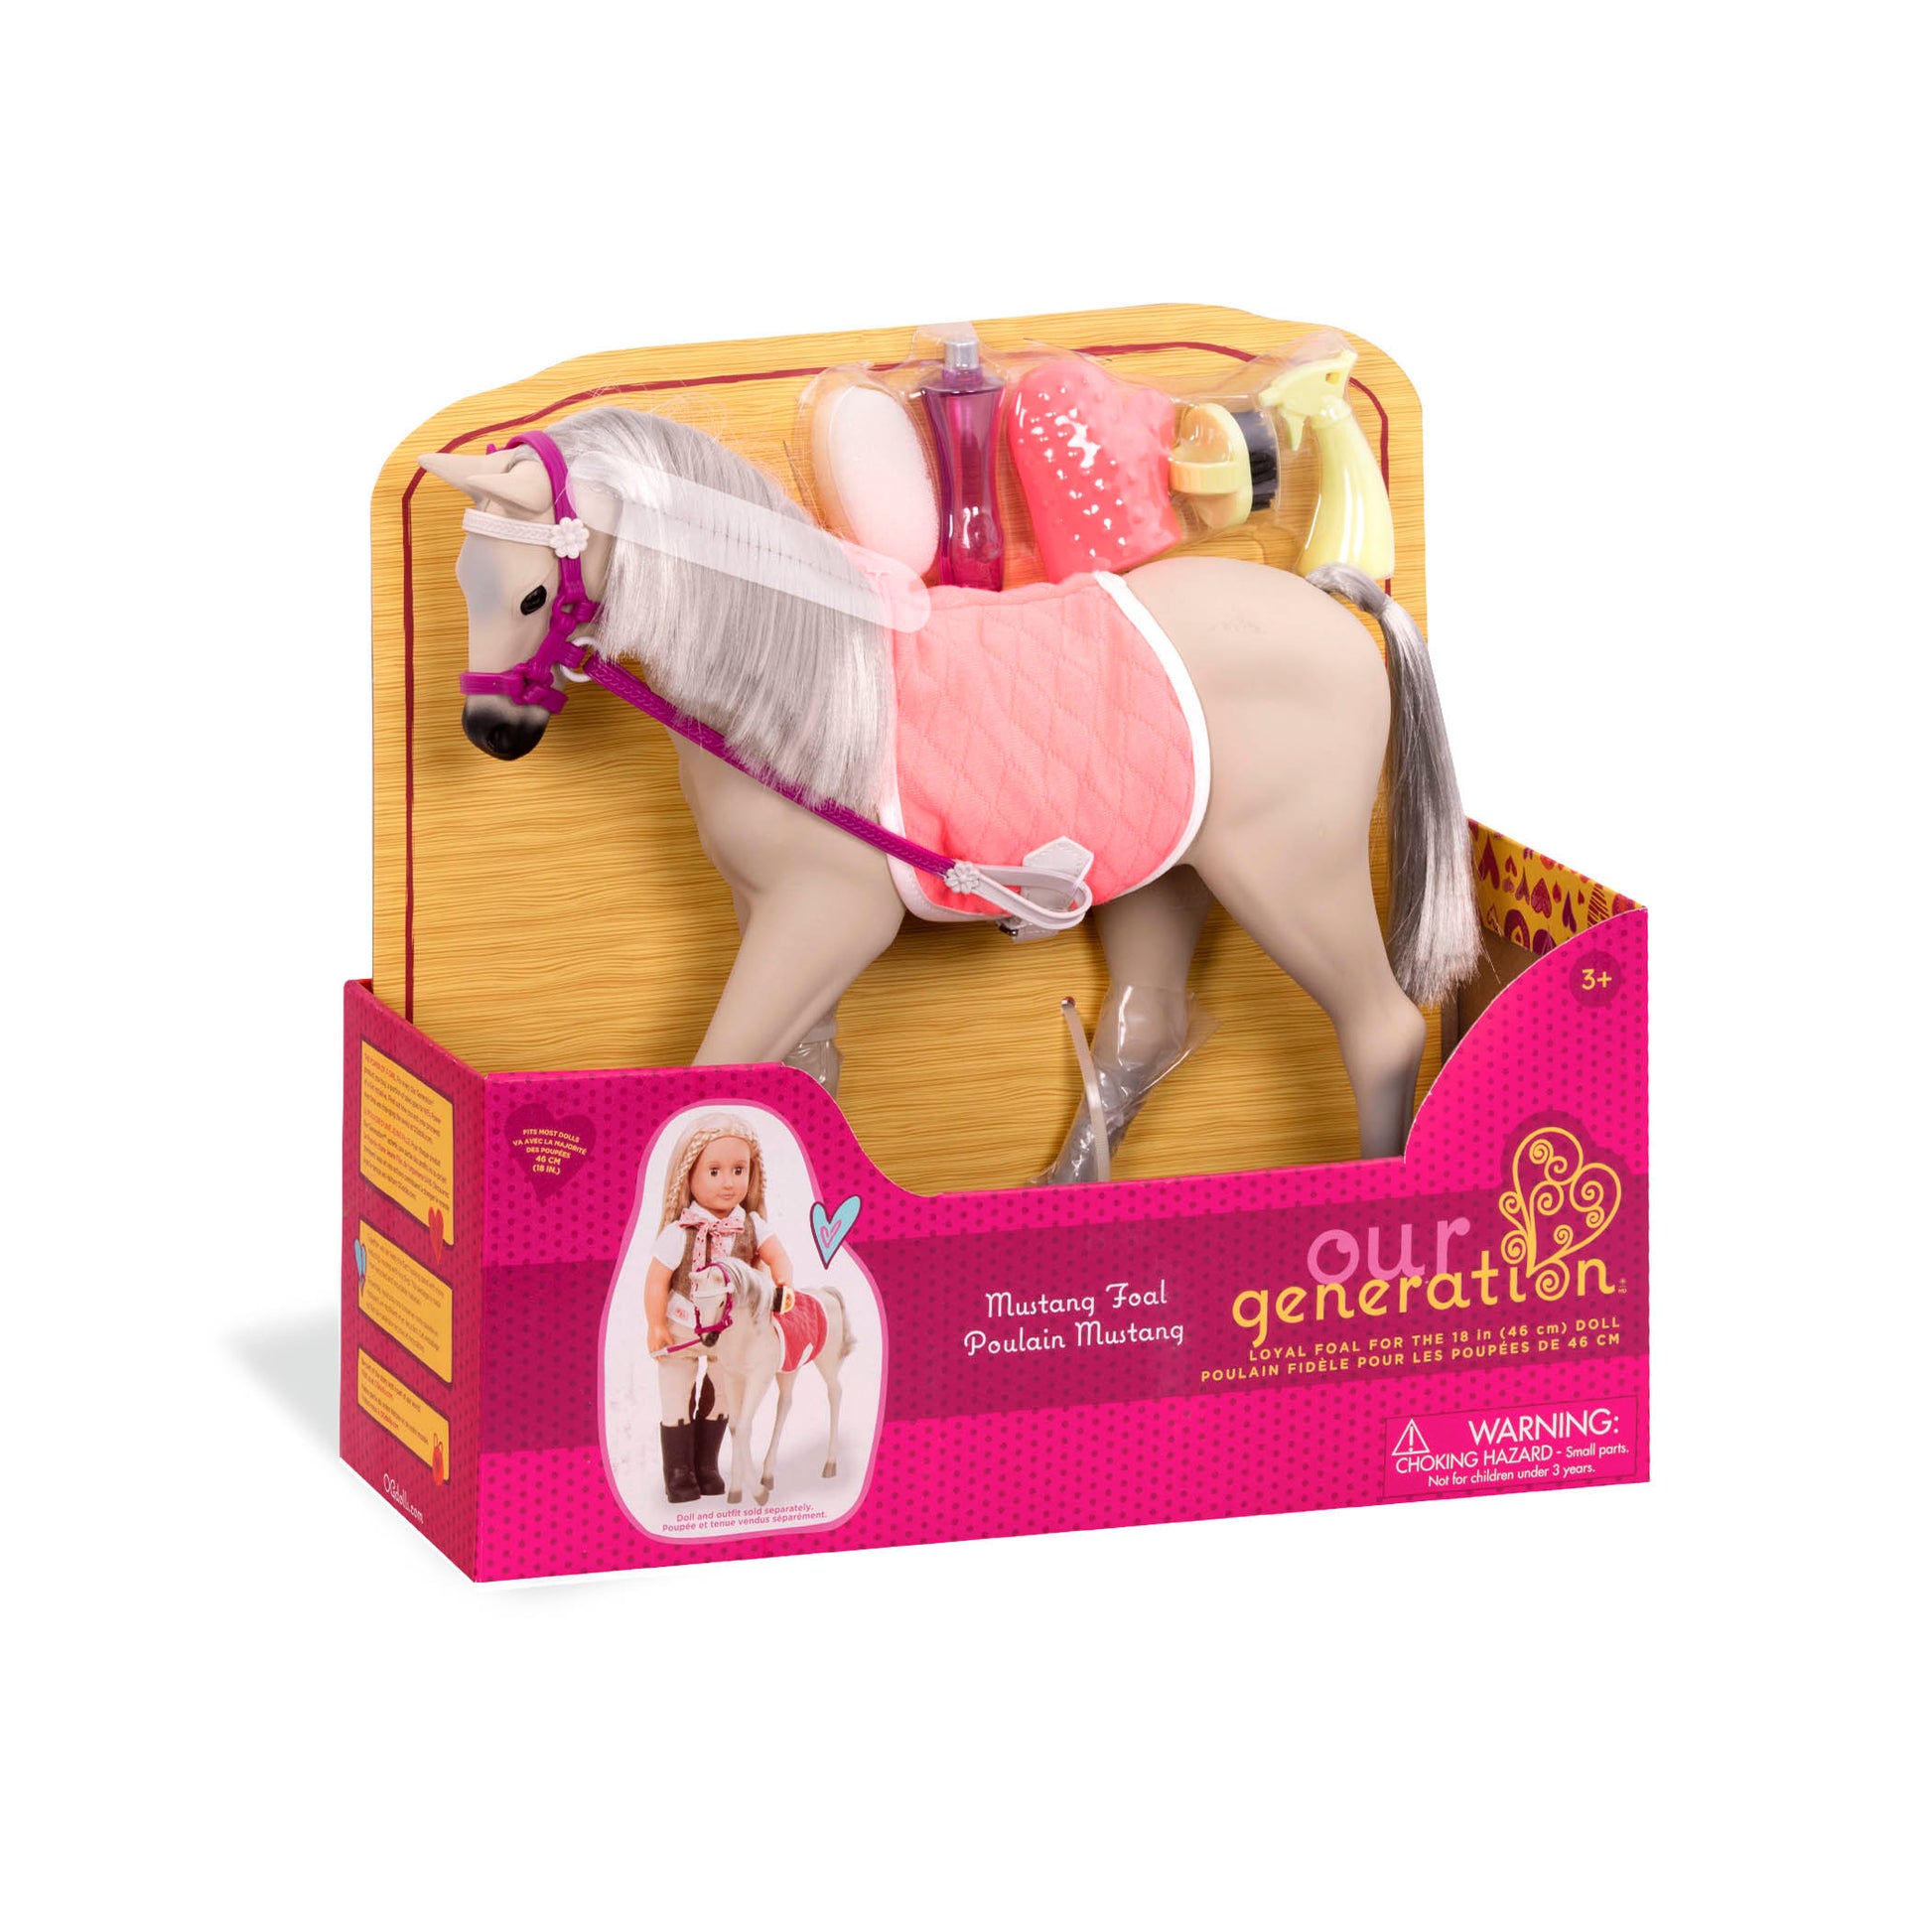 Our Generation Horse Foal - Mustang is an amazing doll accessory for creative play for young girls The Toy Wagon